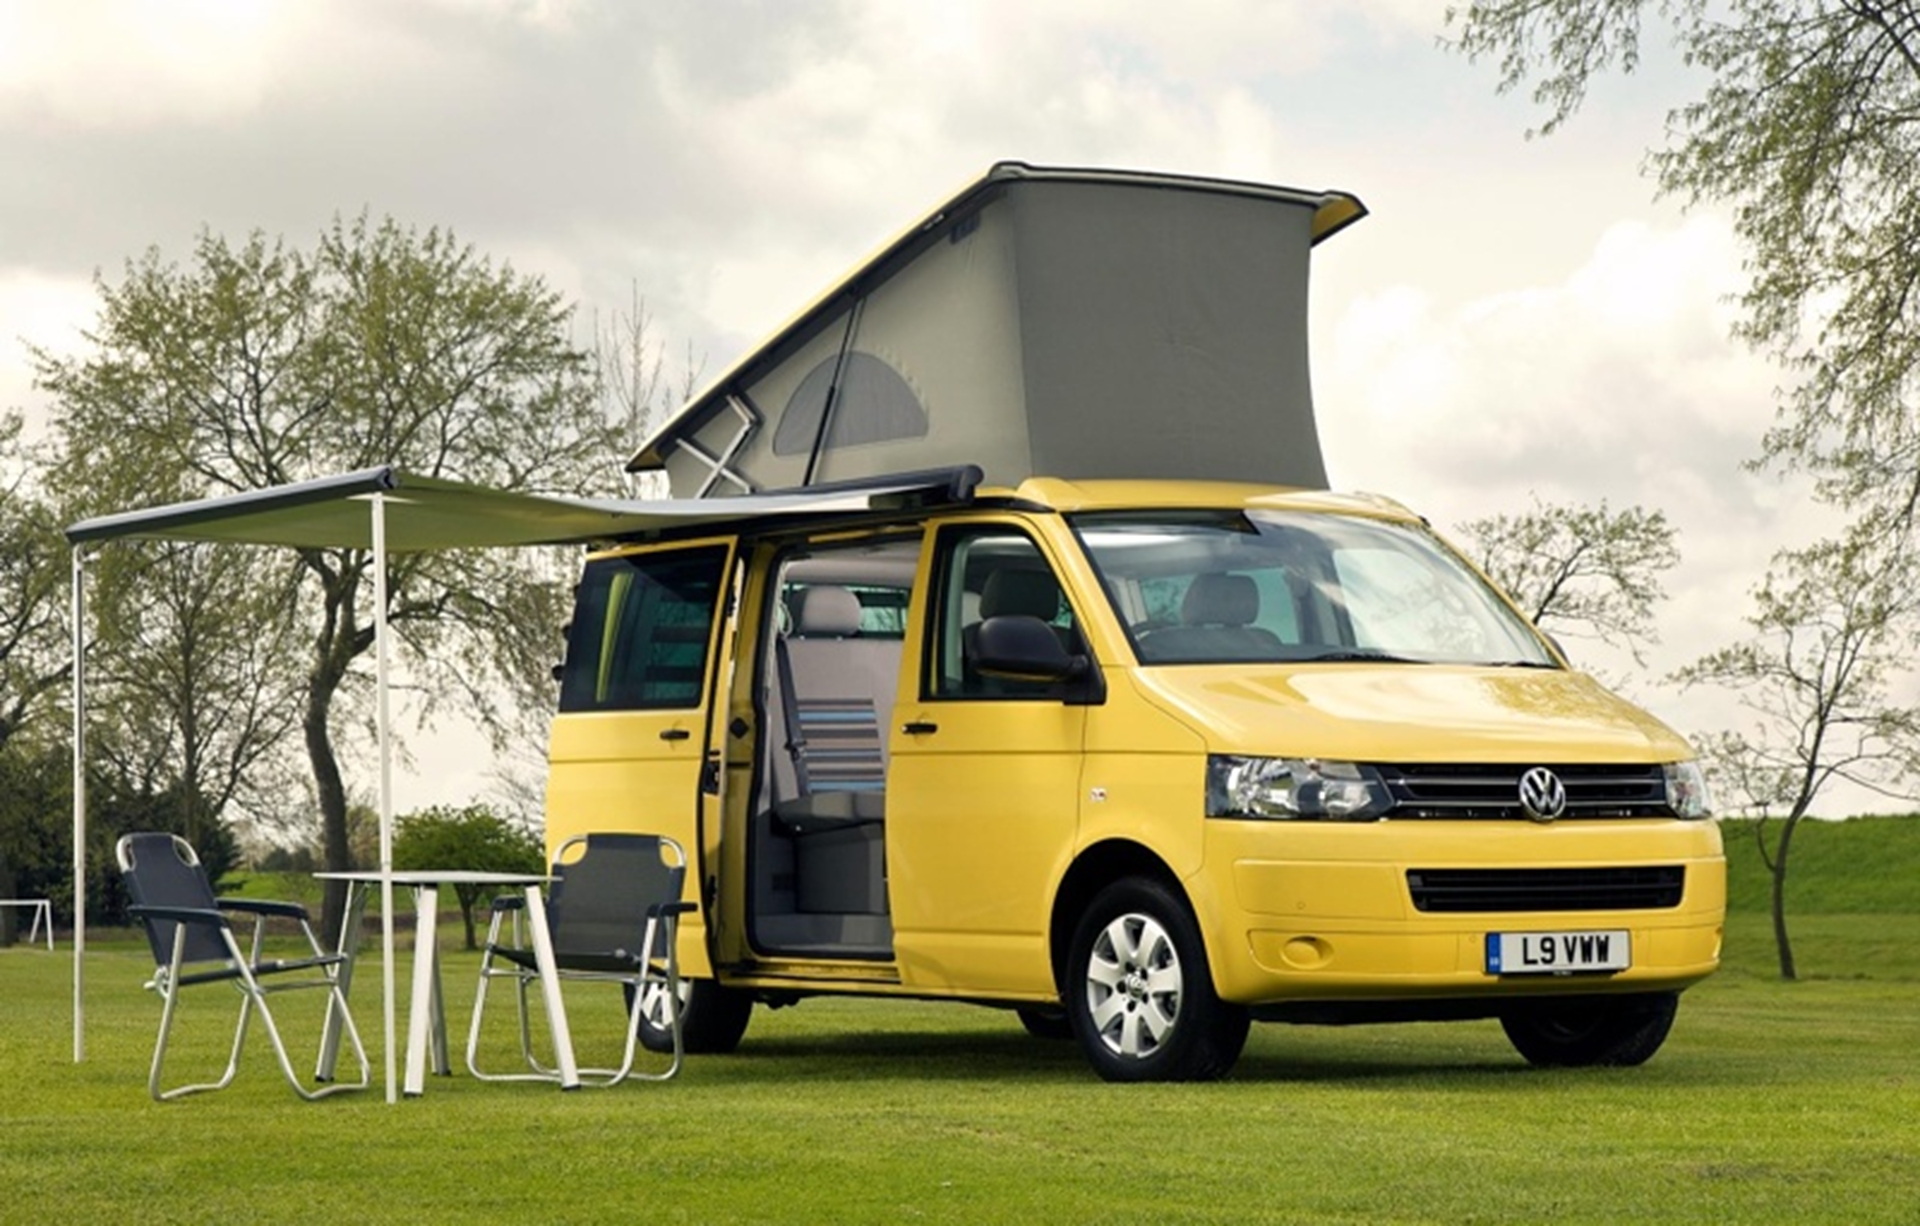 CALIFORNIA CAMPERVAN DREAMING WITH UP TO 10 YEARS TO PAY